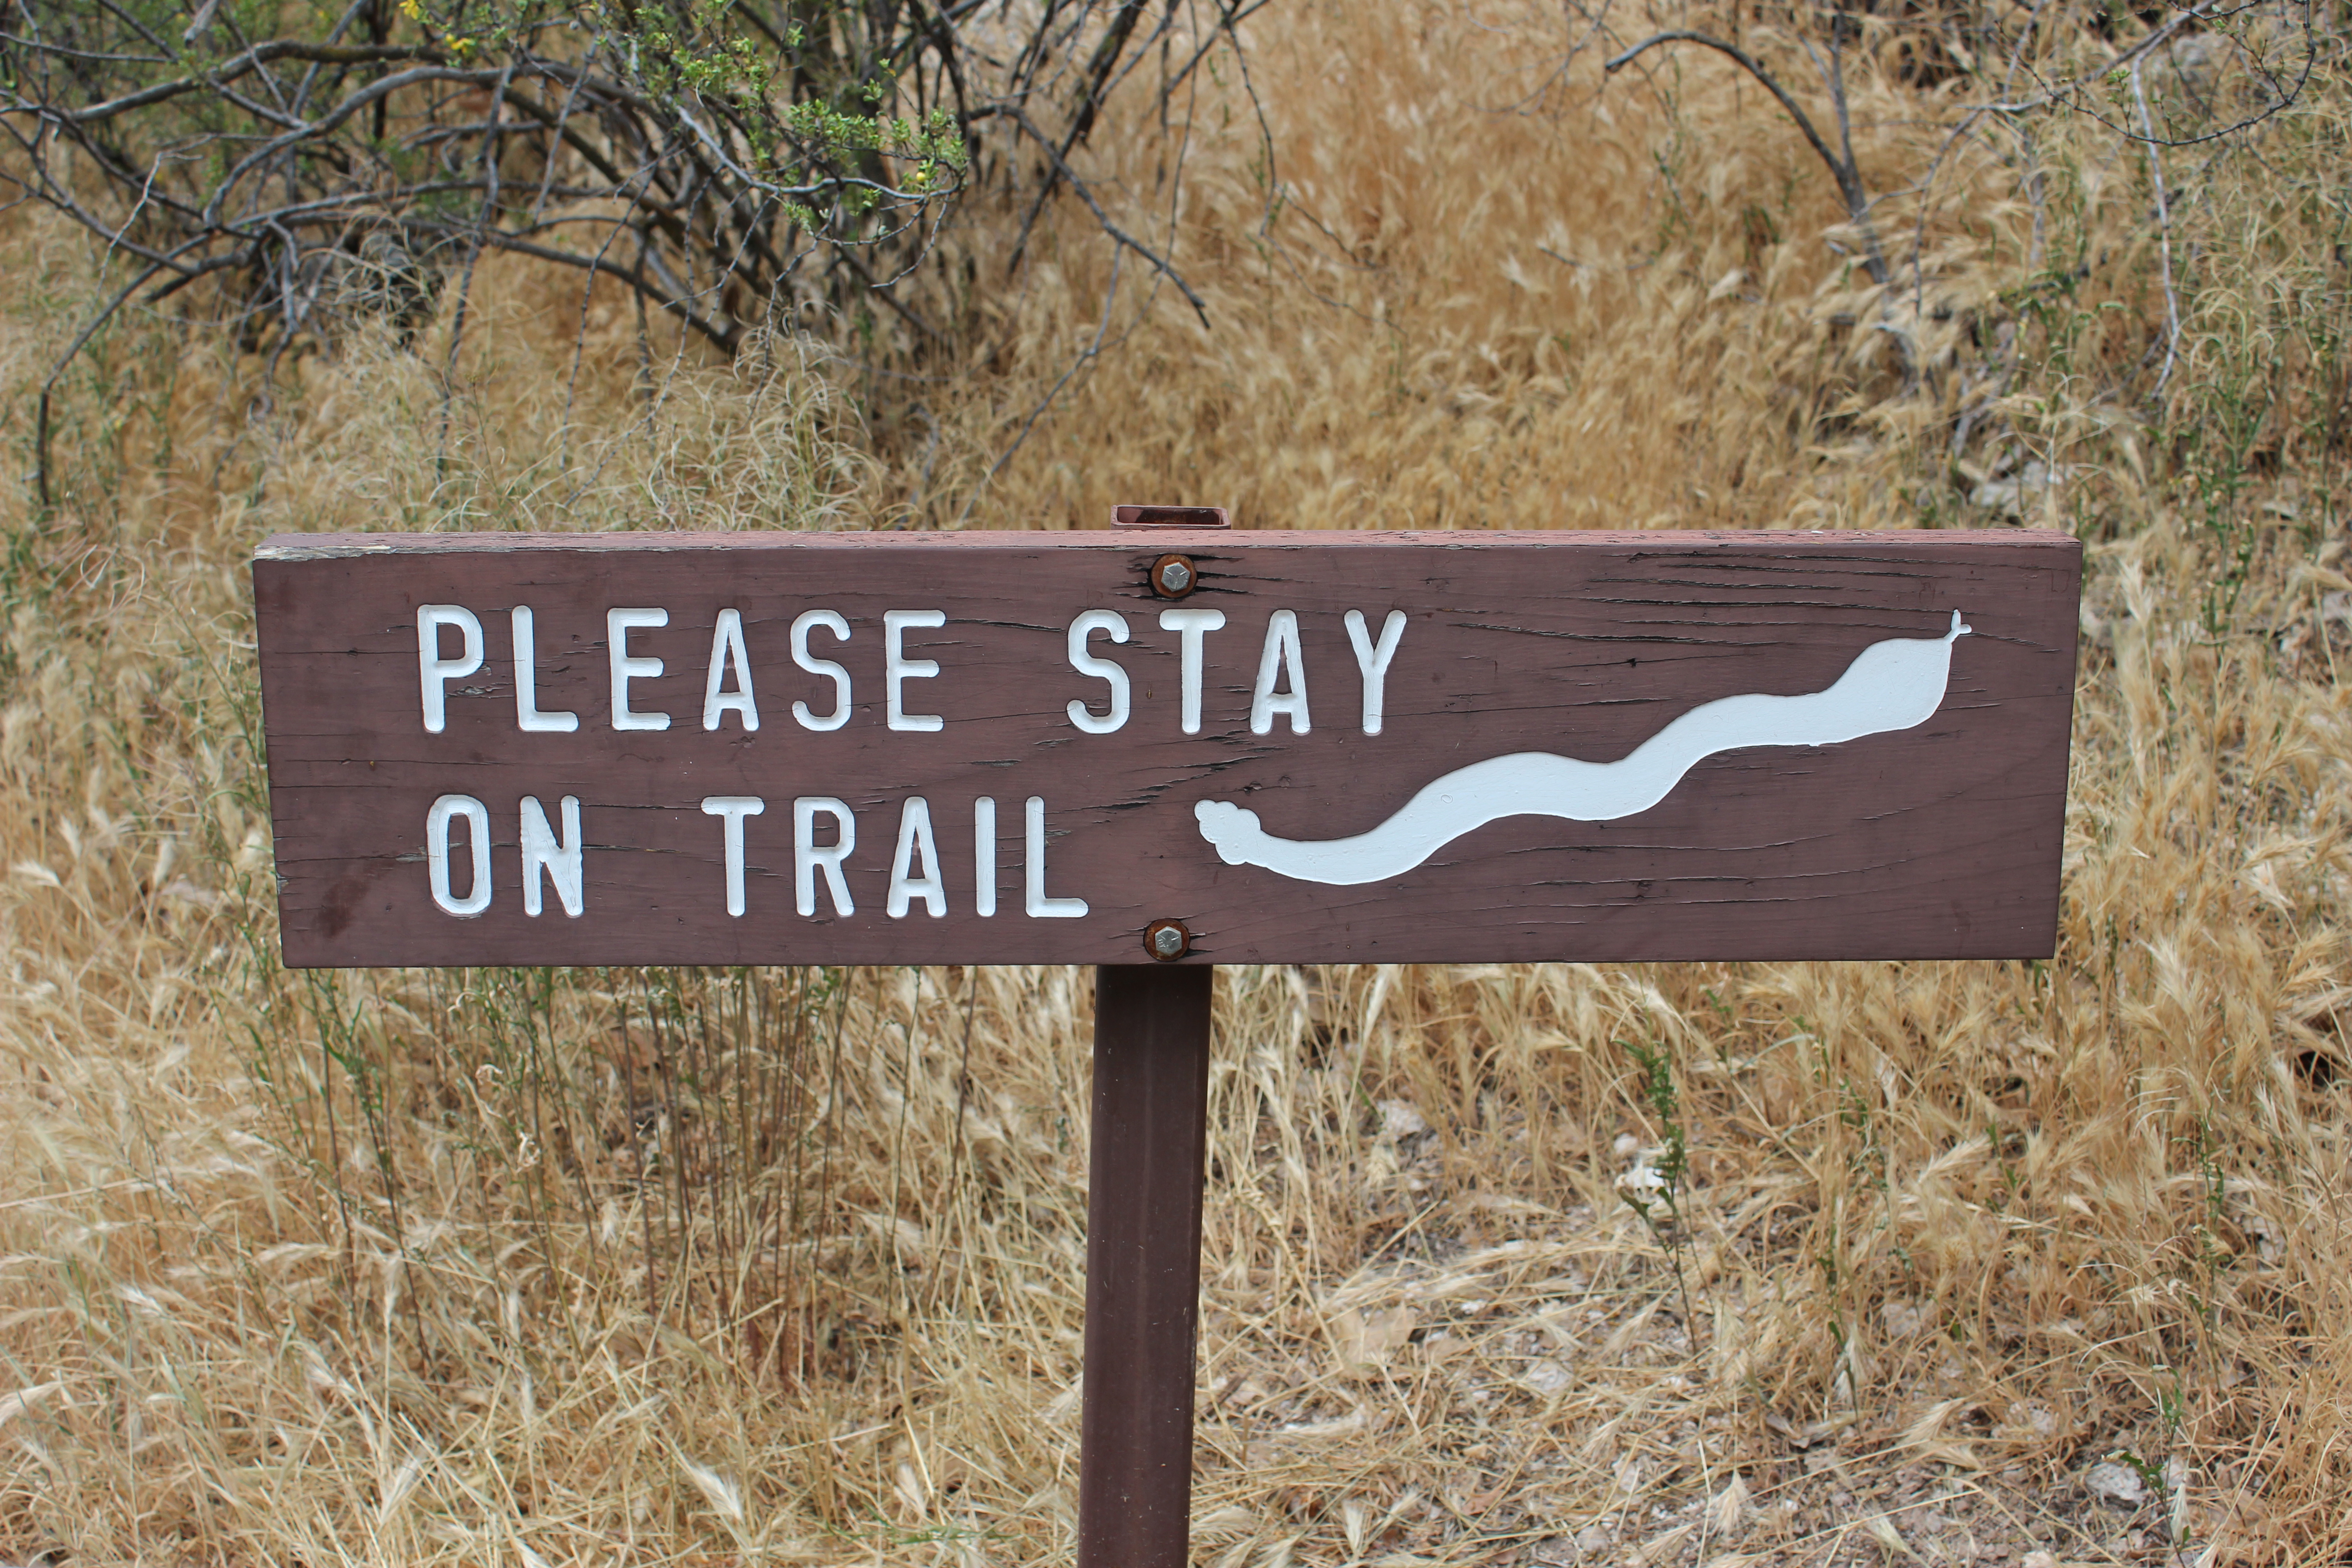 Trail sign warning hikes to "Please Stay on Trail" due to snakes